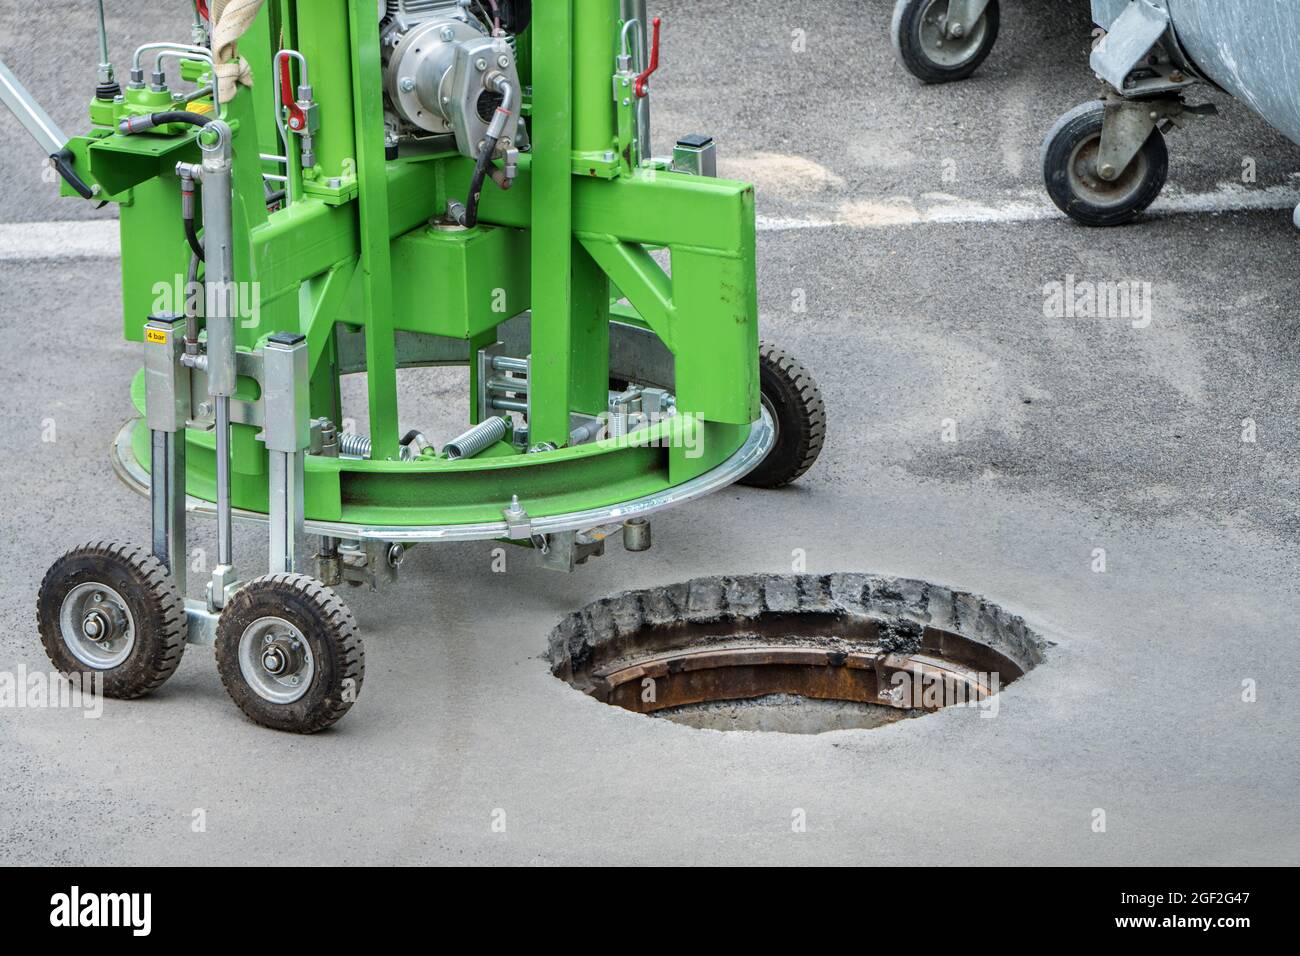 a manhole cover is milled in the street with a special machine, Sewer work, Canal work, Duct work, Road construction Stock Photo